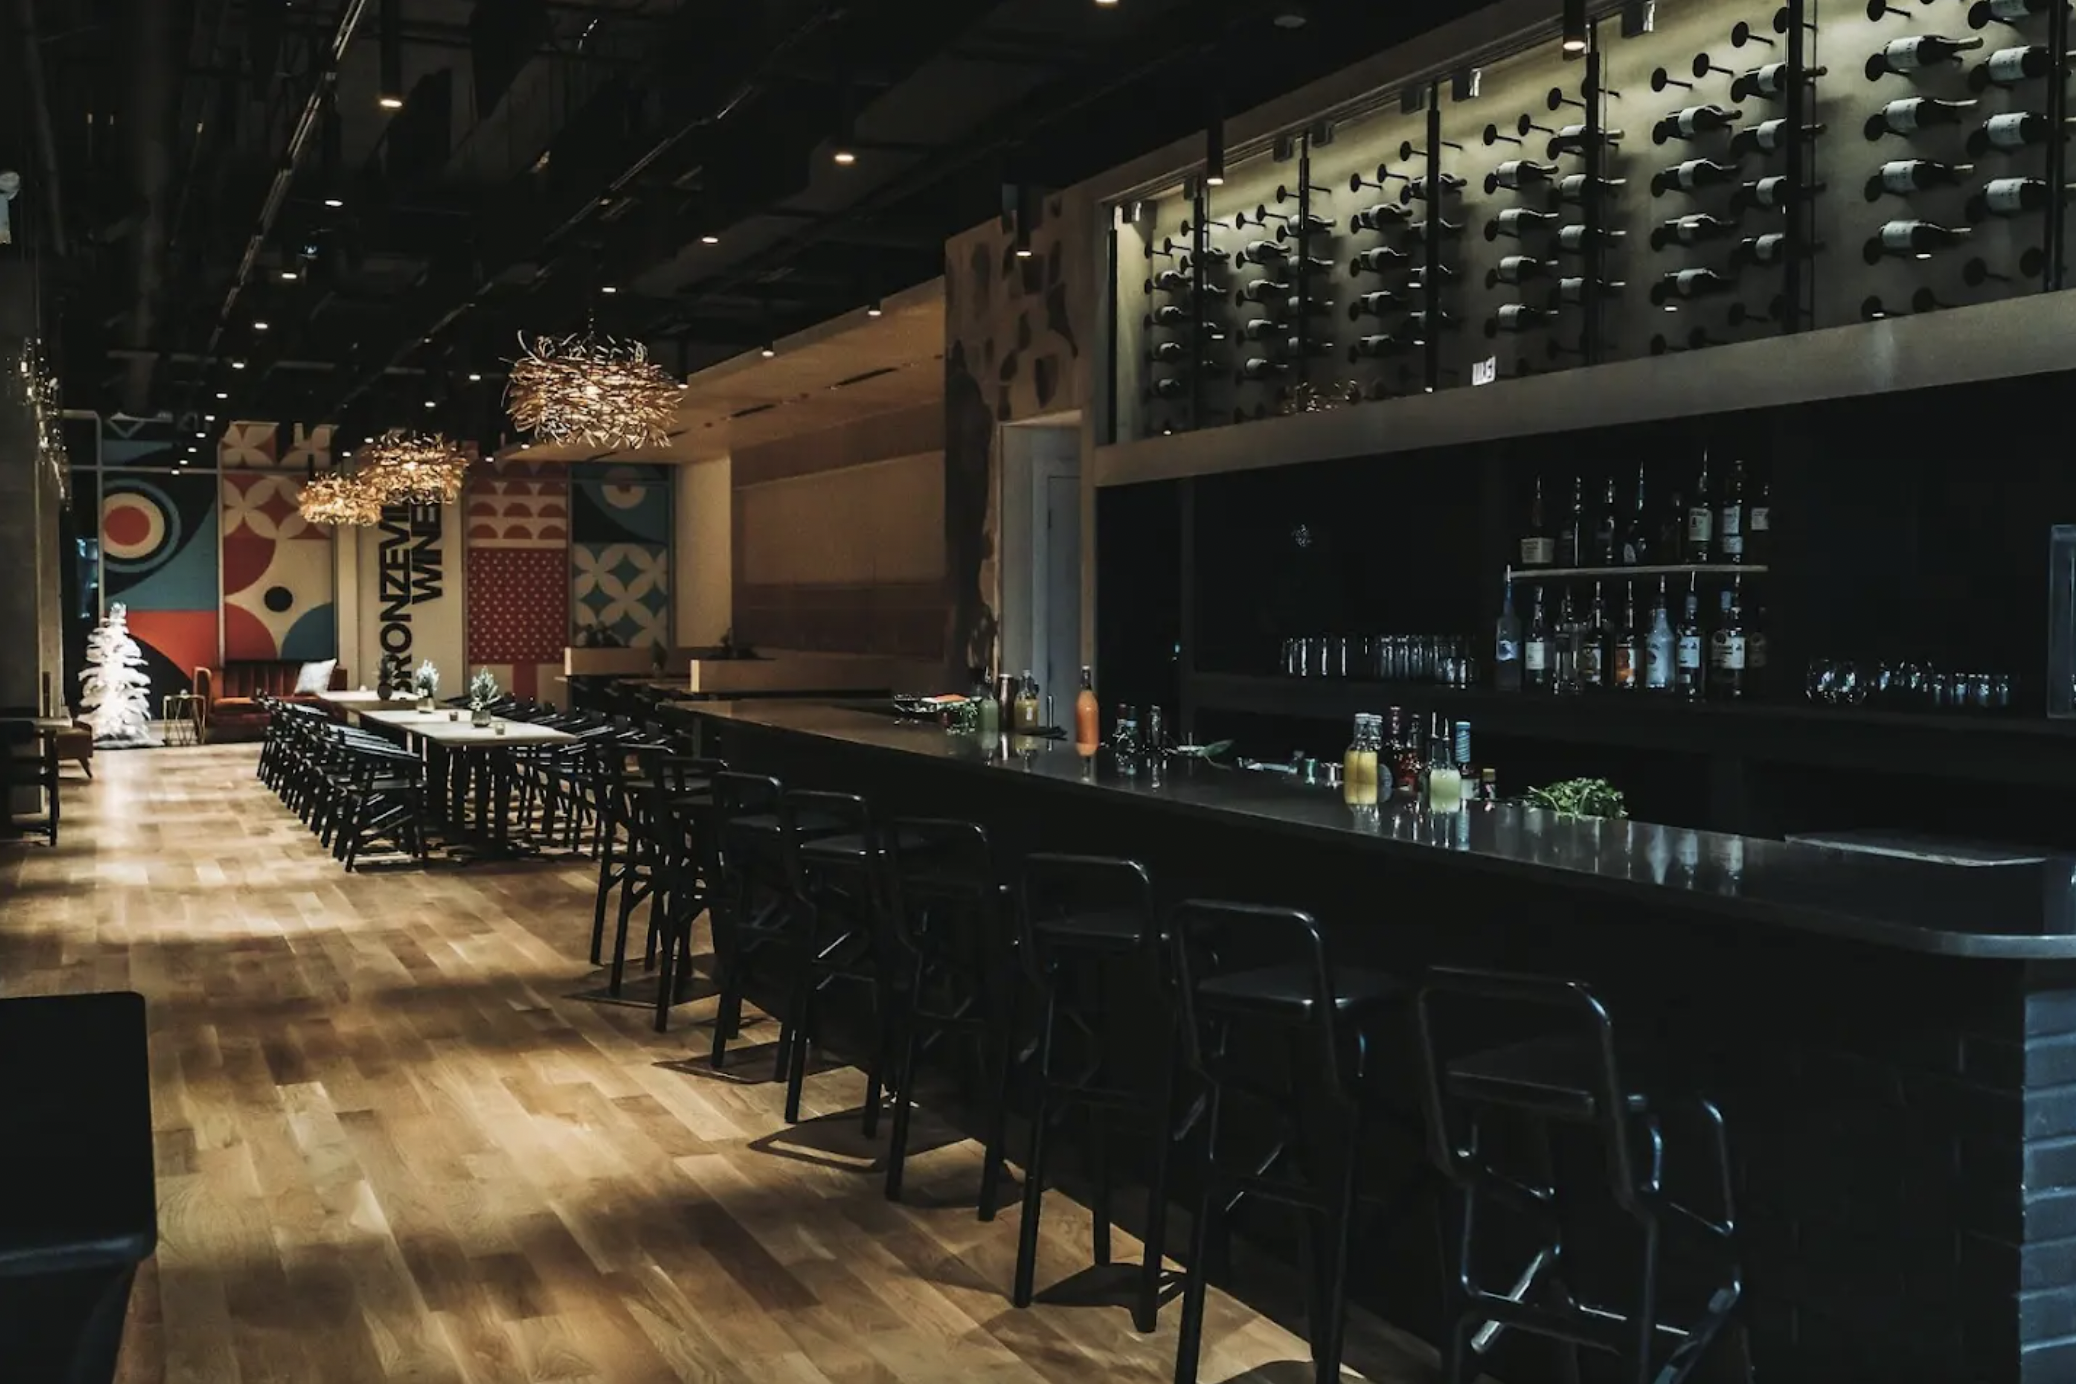 A long restaurant space with a dark bar and natural wood floors.